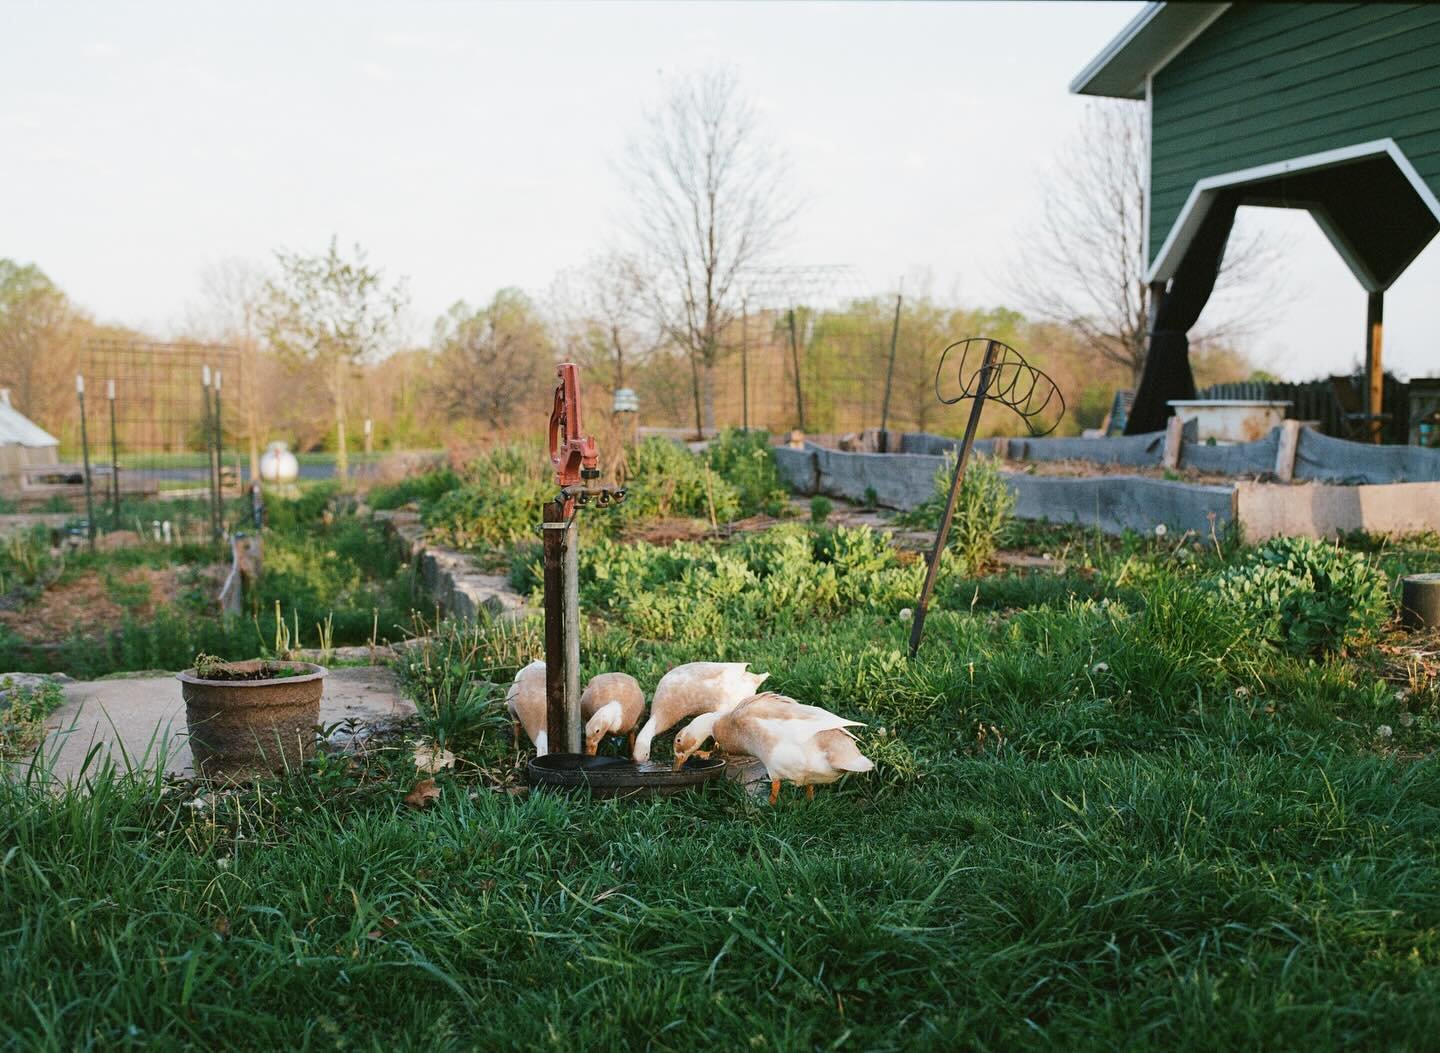 Medium format film work for Foxhollow Farm, shot on Portra 400. Came for the cows but the ducks stole the show!